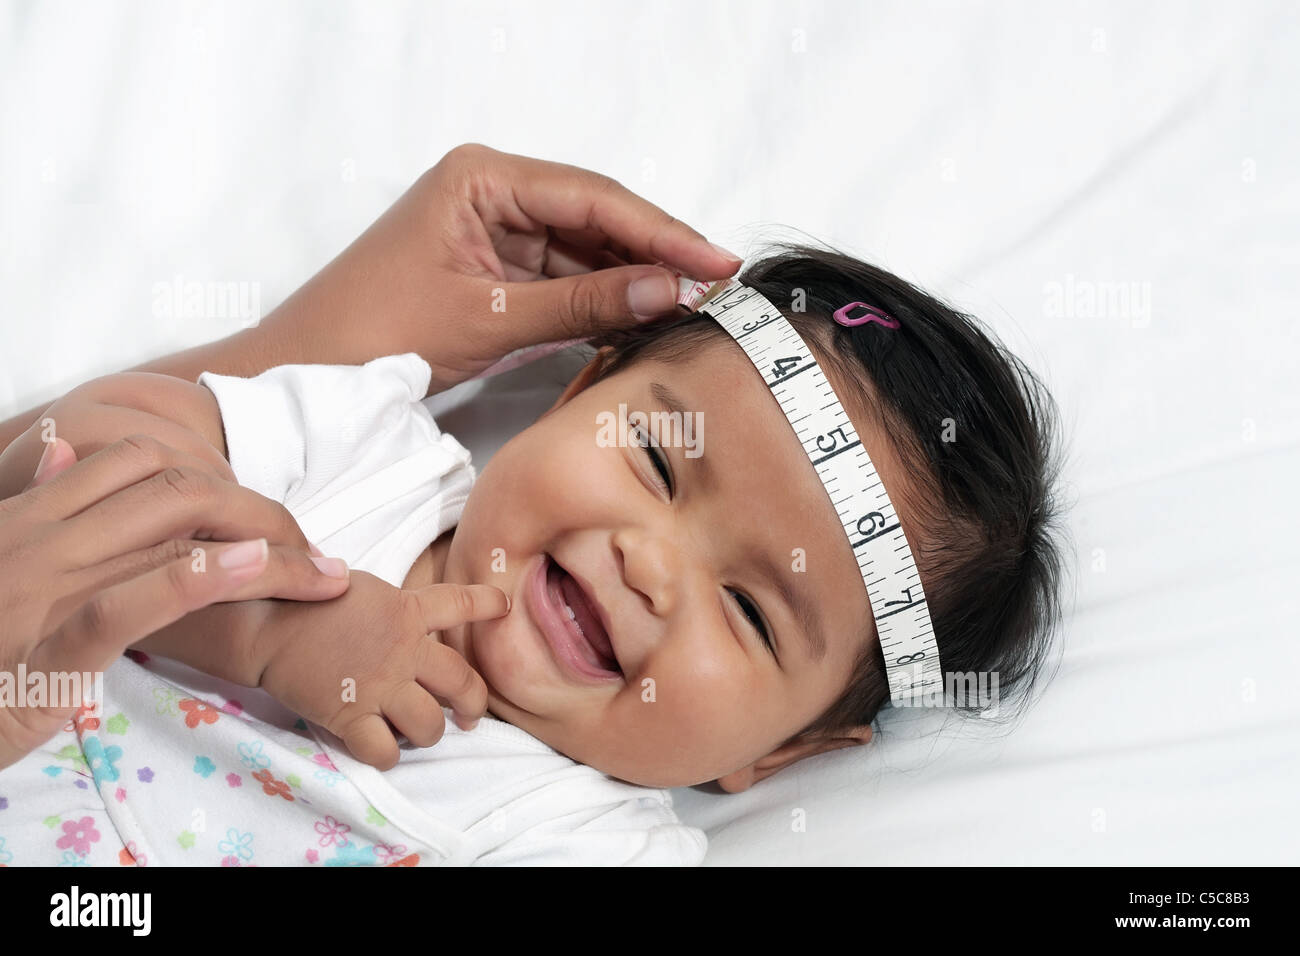 1,093 Measuring Baby Head Images, Stock Photos, 3D objects